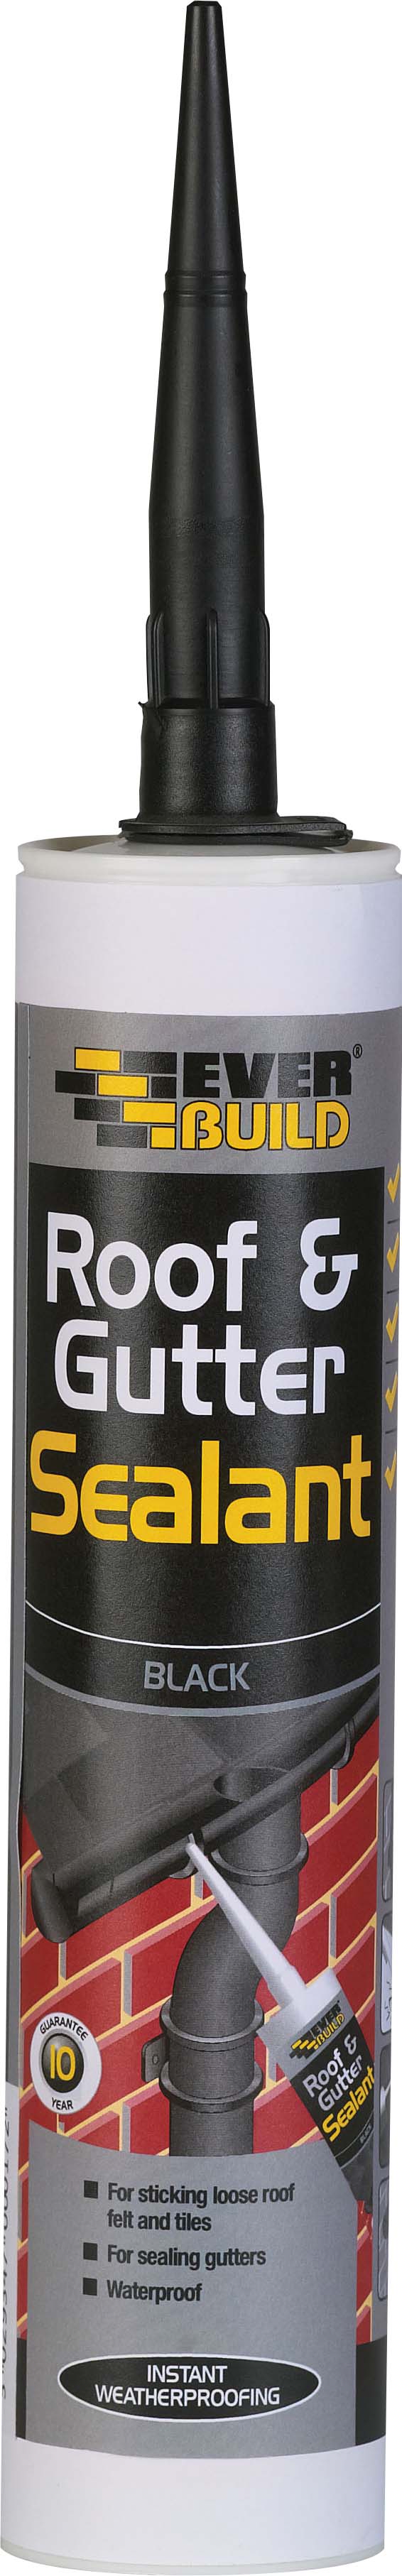 EVER BUILD ROOF & CUTTER SEALANT 300ML